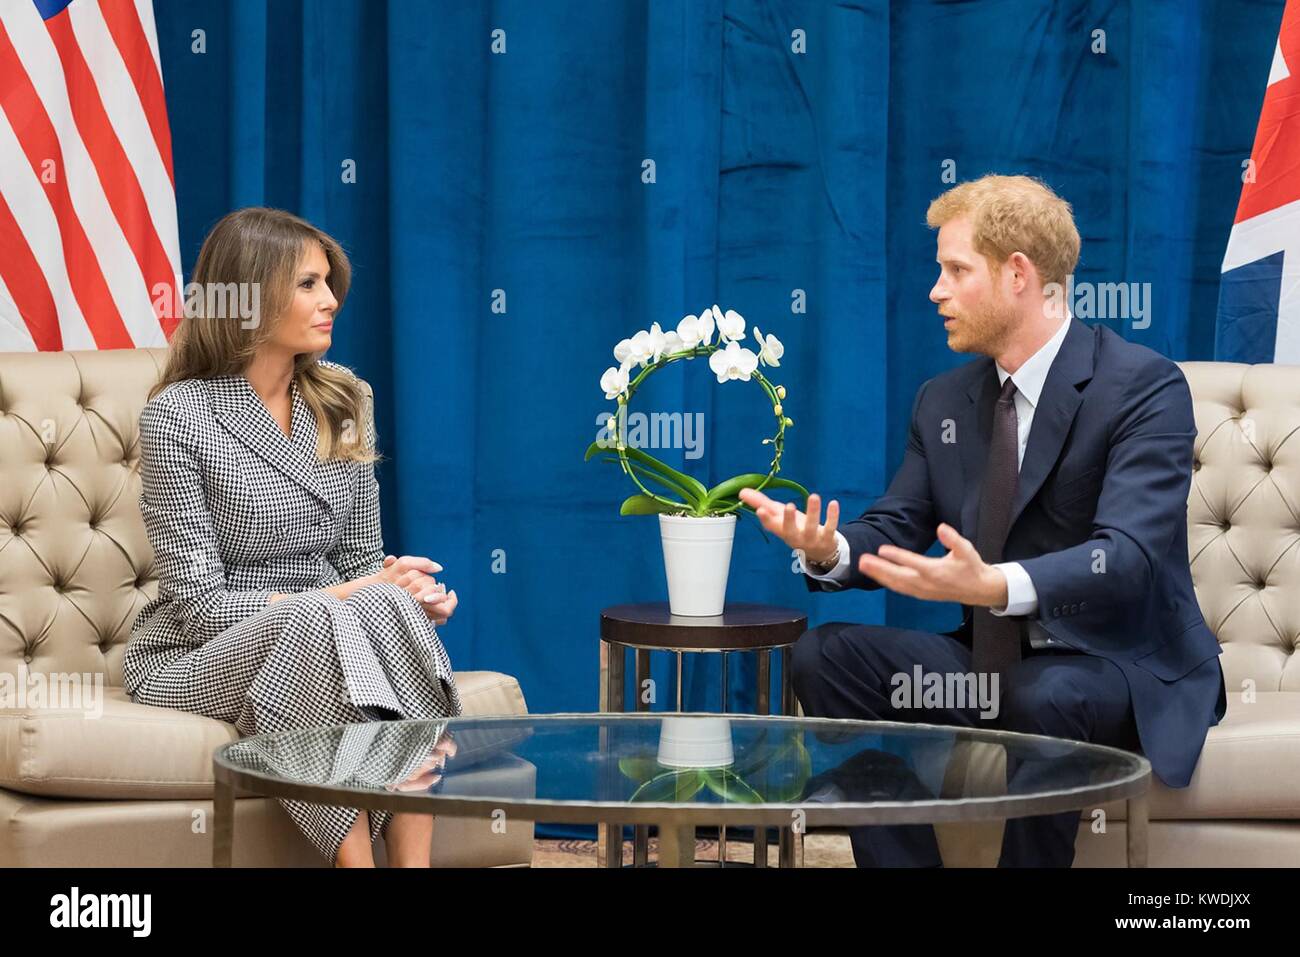 First Lady Melania Trump and Prince Harry at the INVICTUS GAMES in Toronto, Canada. On Sept. 27, 2017, the First Lady led the US delegation to the INVICTUS GAMES, where she attended the opening ceremonies. INVICTUS GAMES is a sporting event for wounded, injured, and sick servicemen and women (BSLOC 2017 19 7) Stock Photo